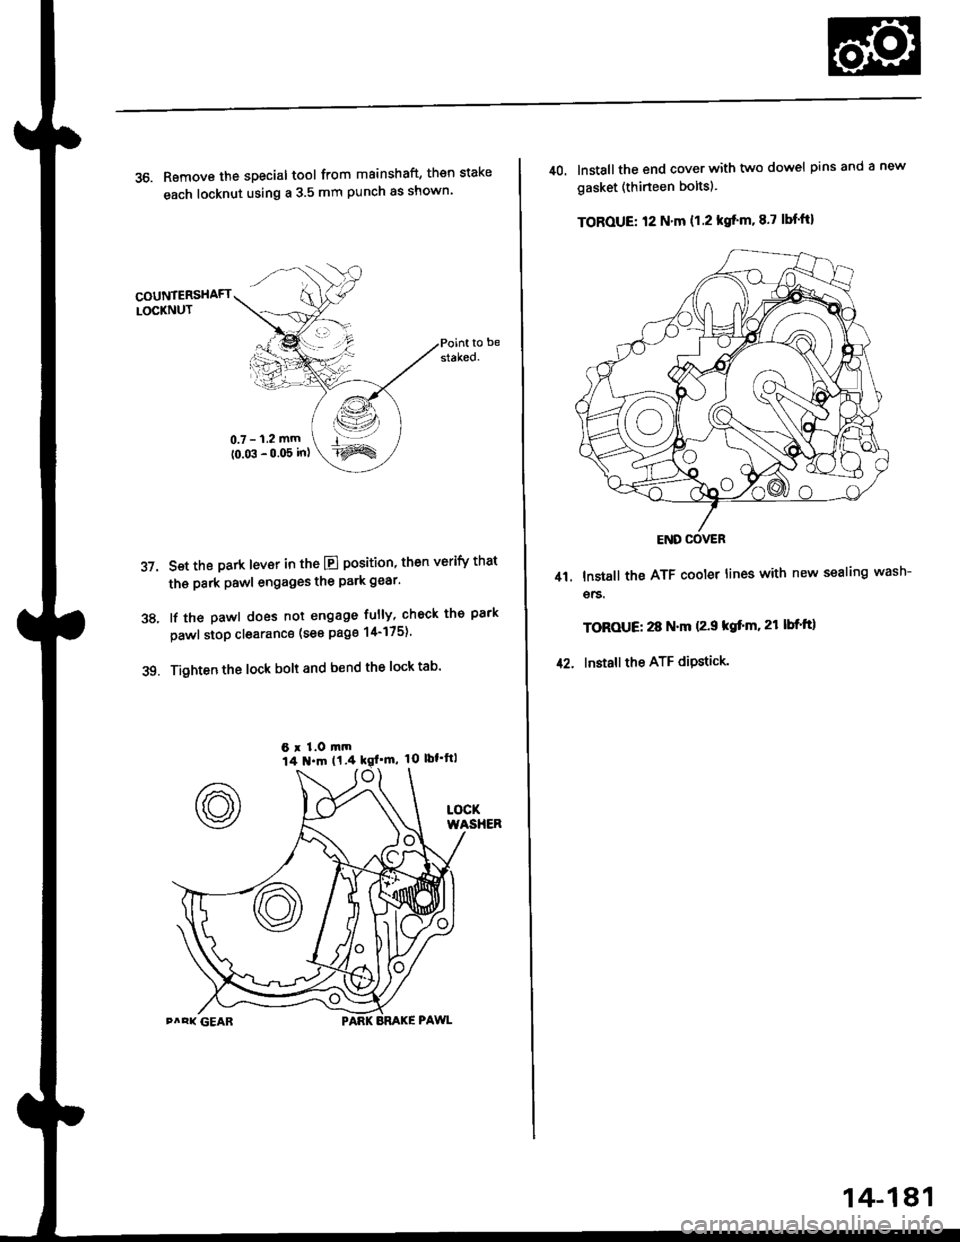 HONDA CIVIC 1996 6.G Workshop Manual 36. Remove the special tool from mainshaft, then stake
each locknut using a 3.5 mm punch as shown
COUNTERSHAFTLOCKNUT
Set the park lever in the El position, then verify that
the park Pawl engages the